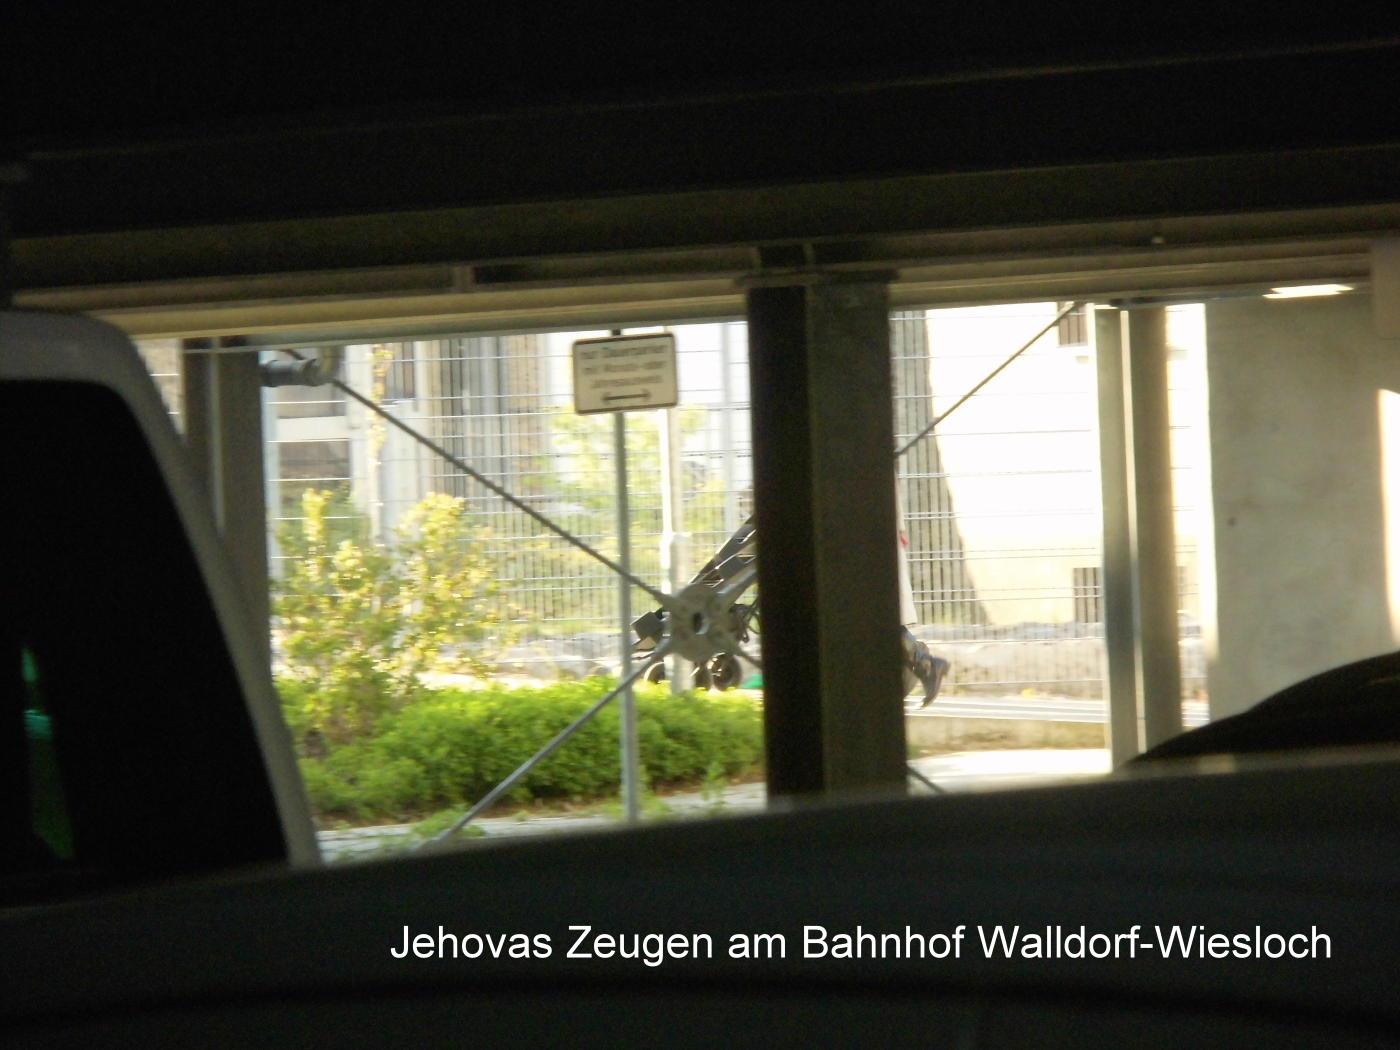 Can Jehovah's Witnesses be photographed?